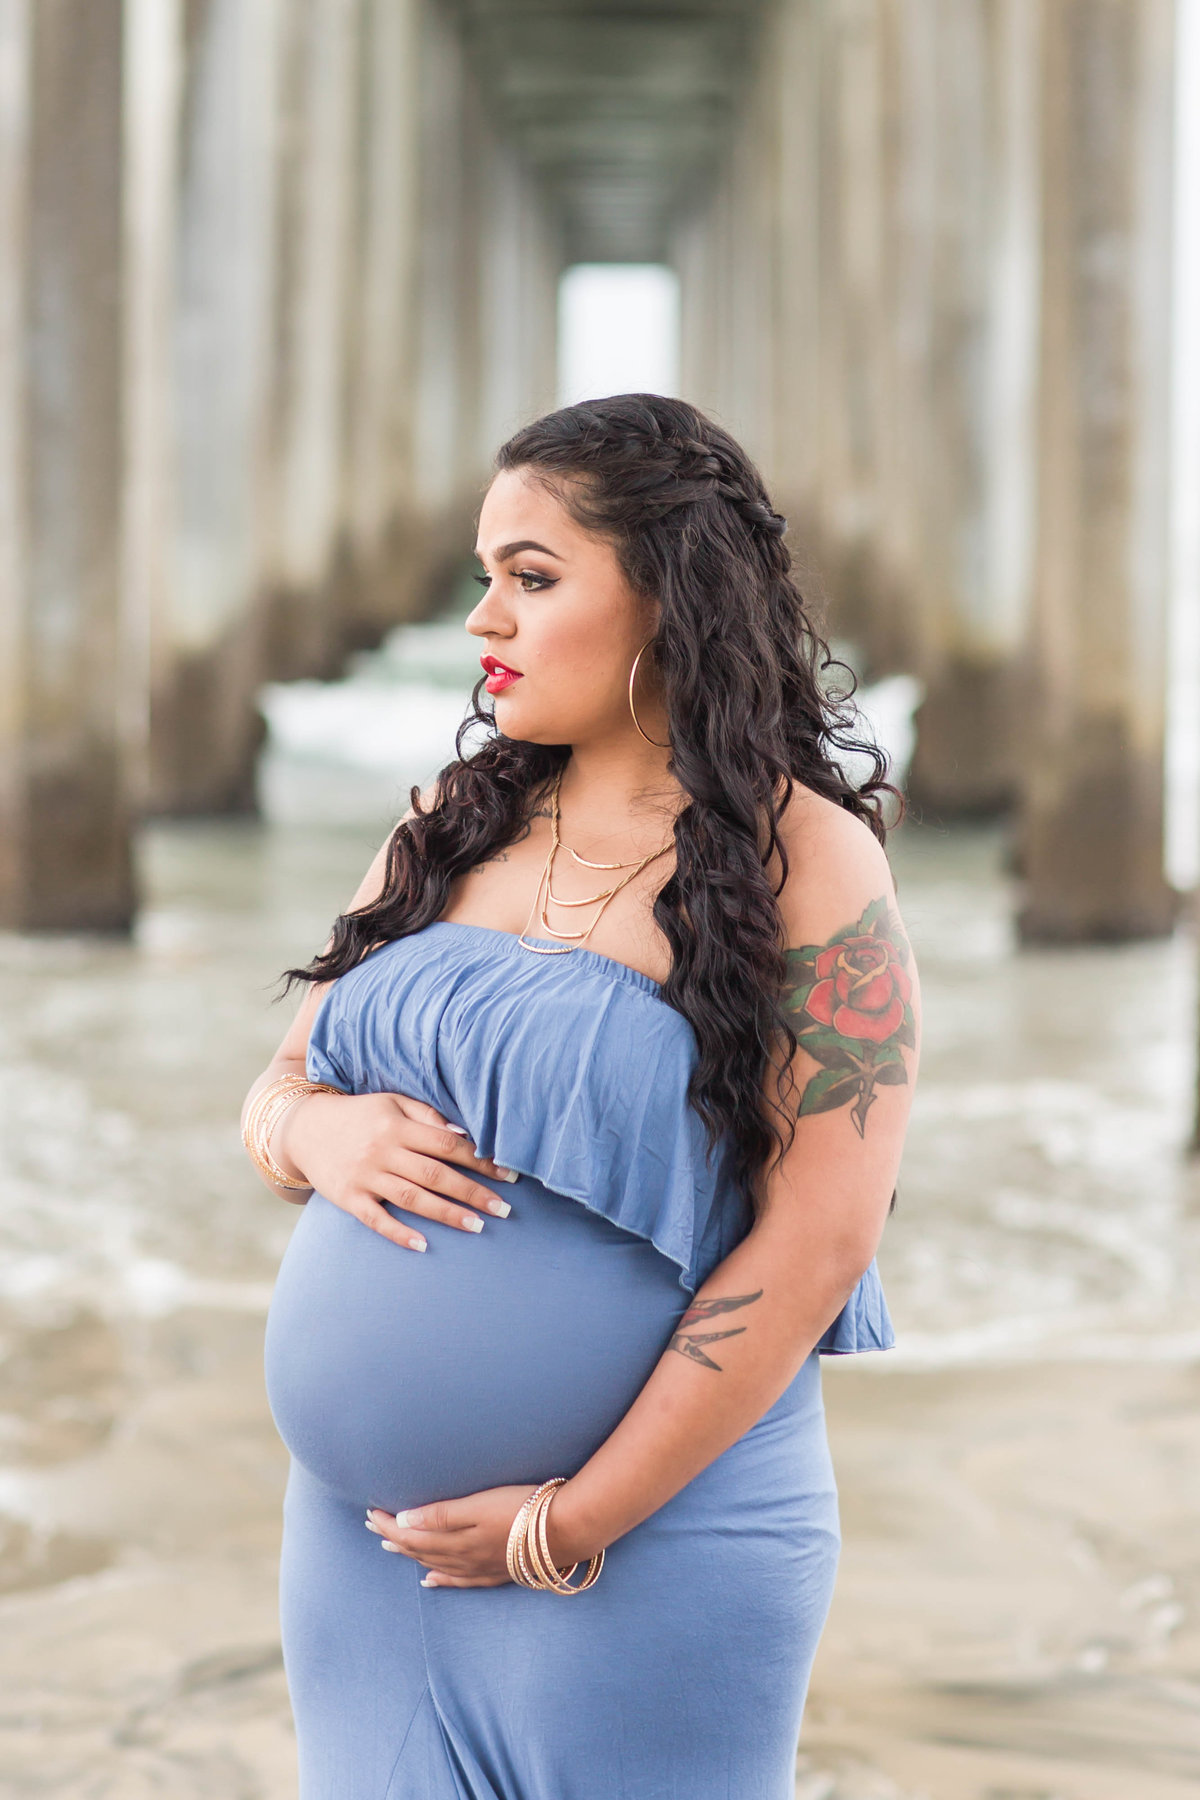 scripps-pier-san-diego-maternity-photography-mother-to-be